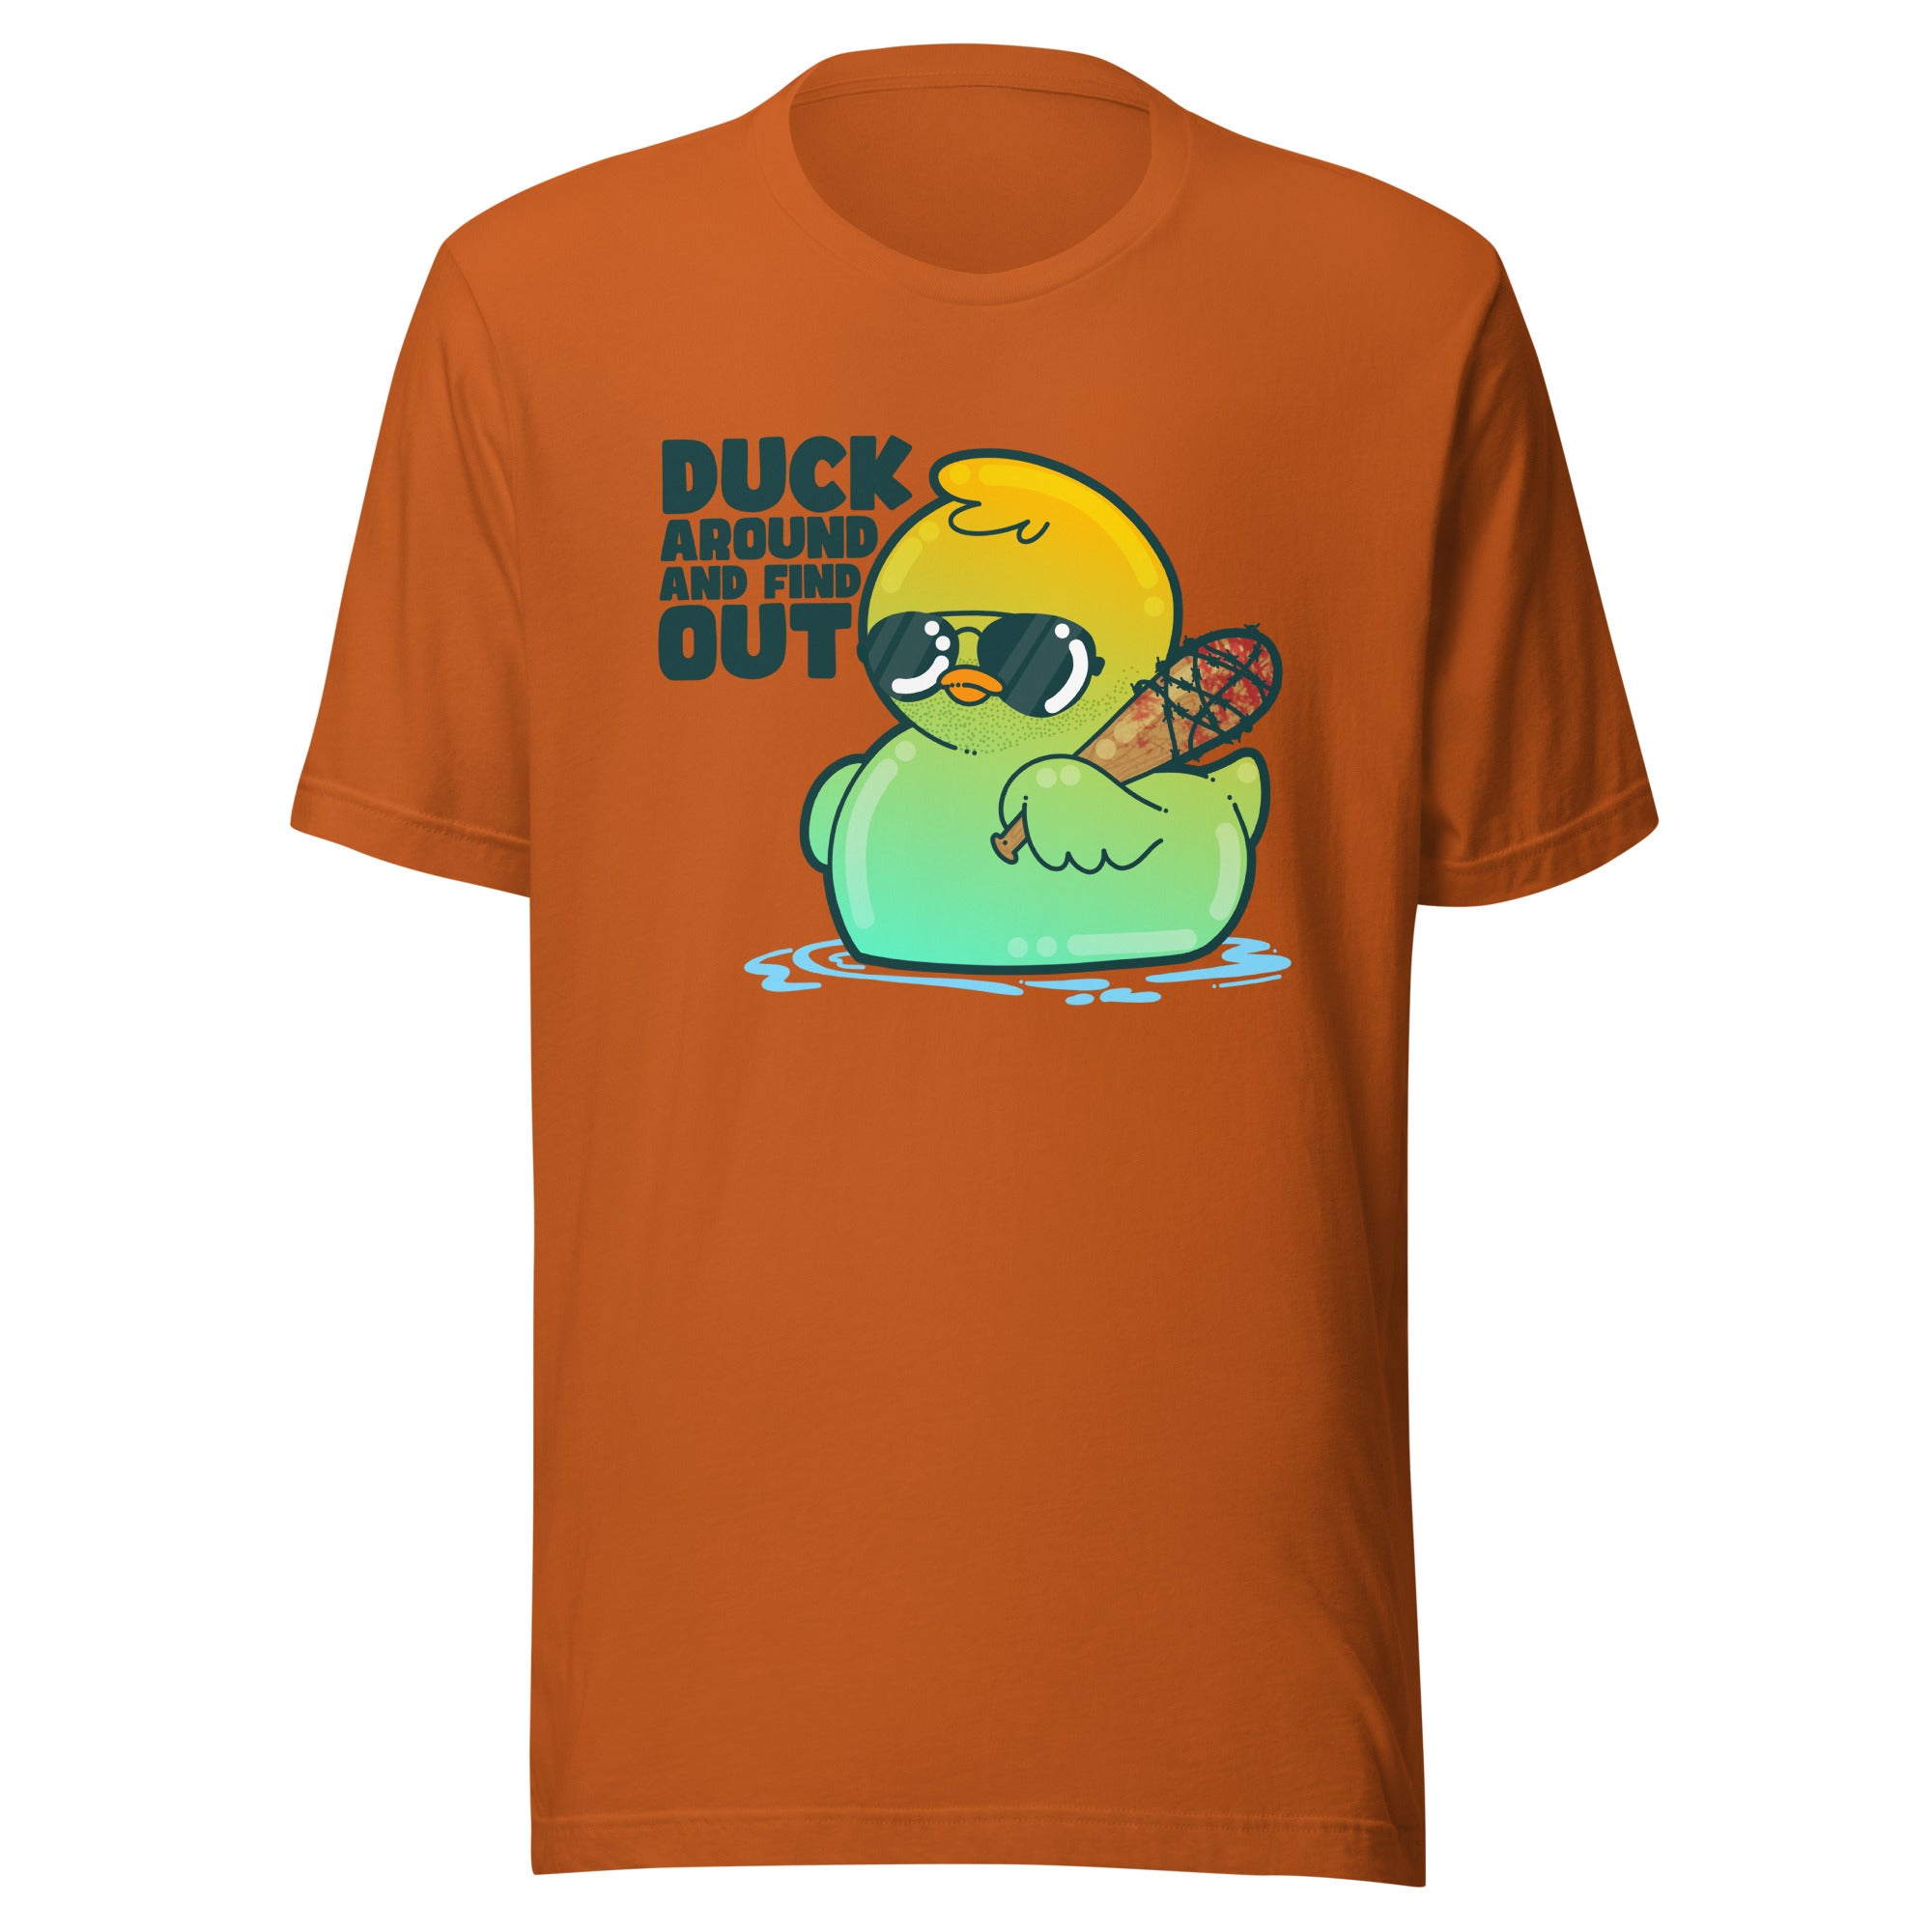 DUCK AROUND AND FIND OUT - Tee - ChubbleGumLLC